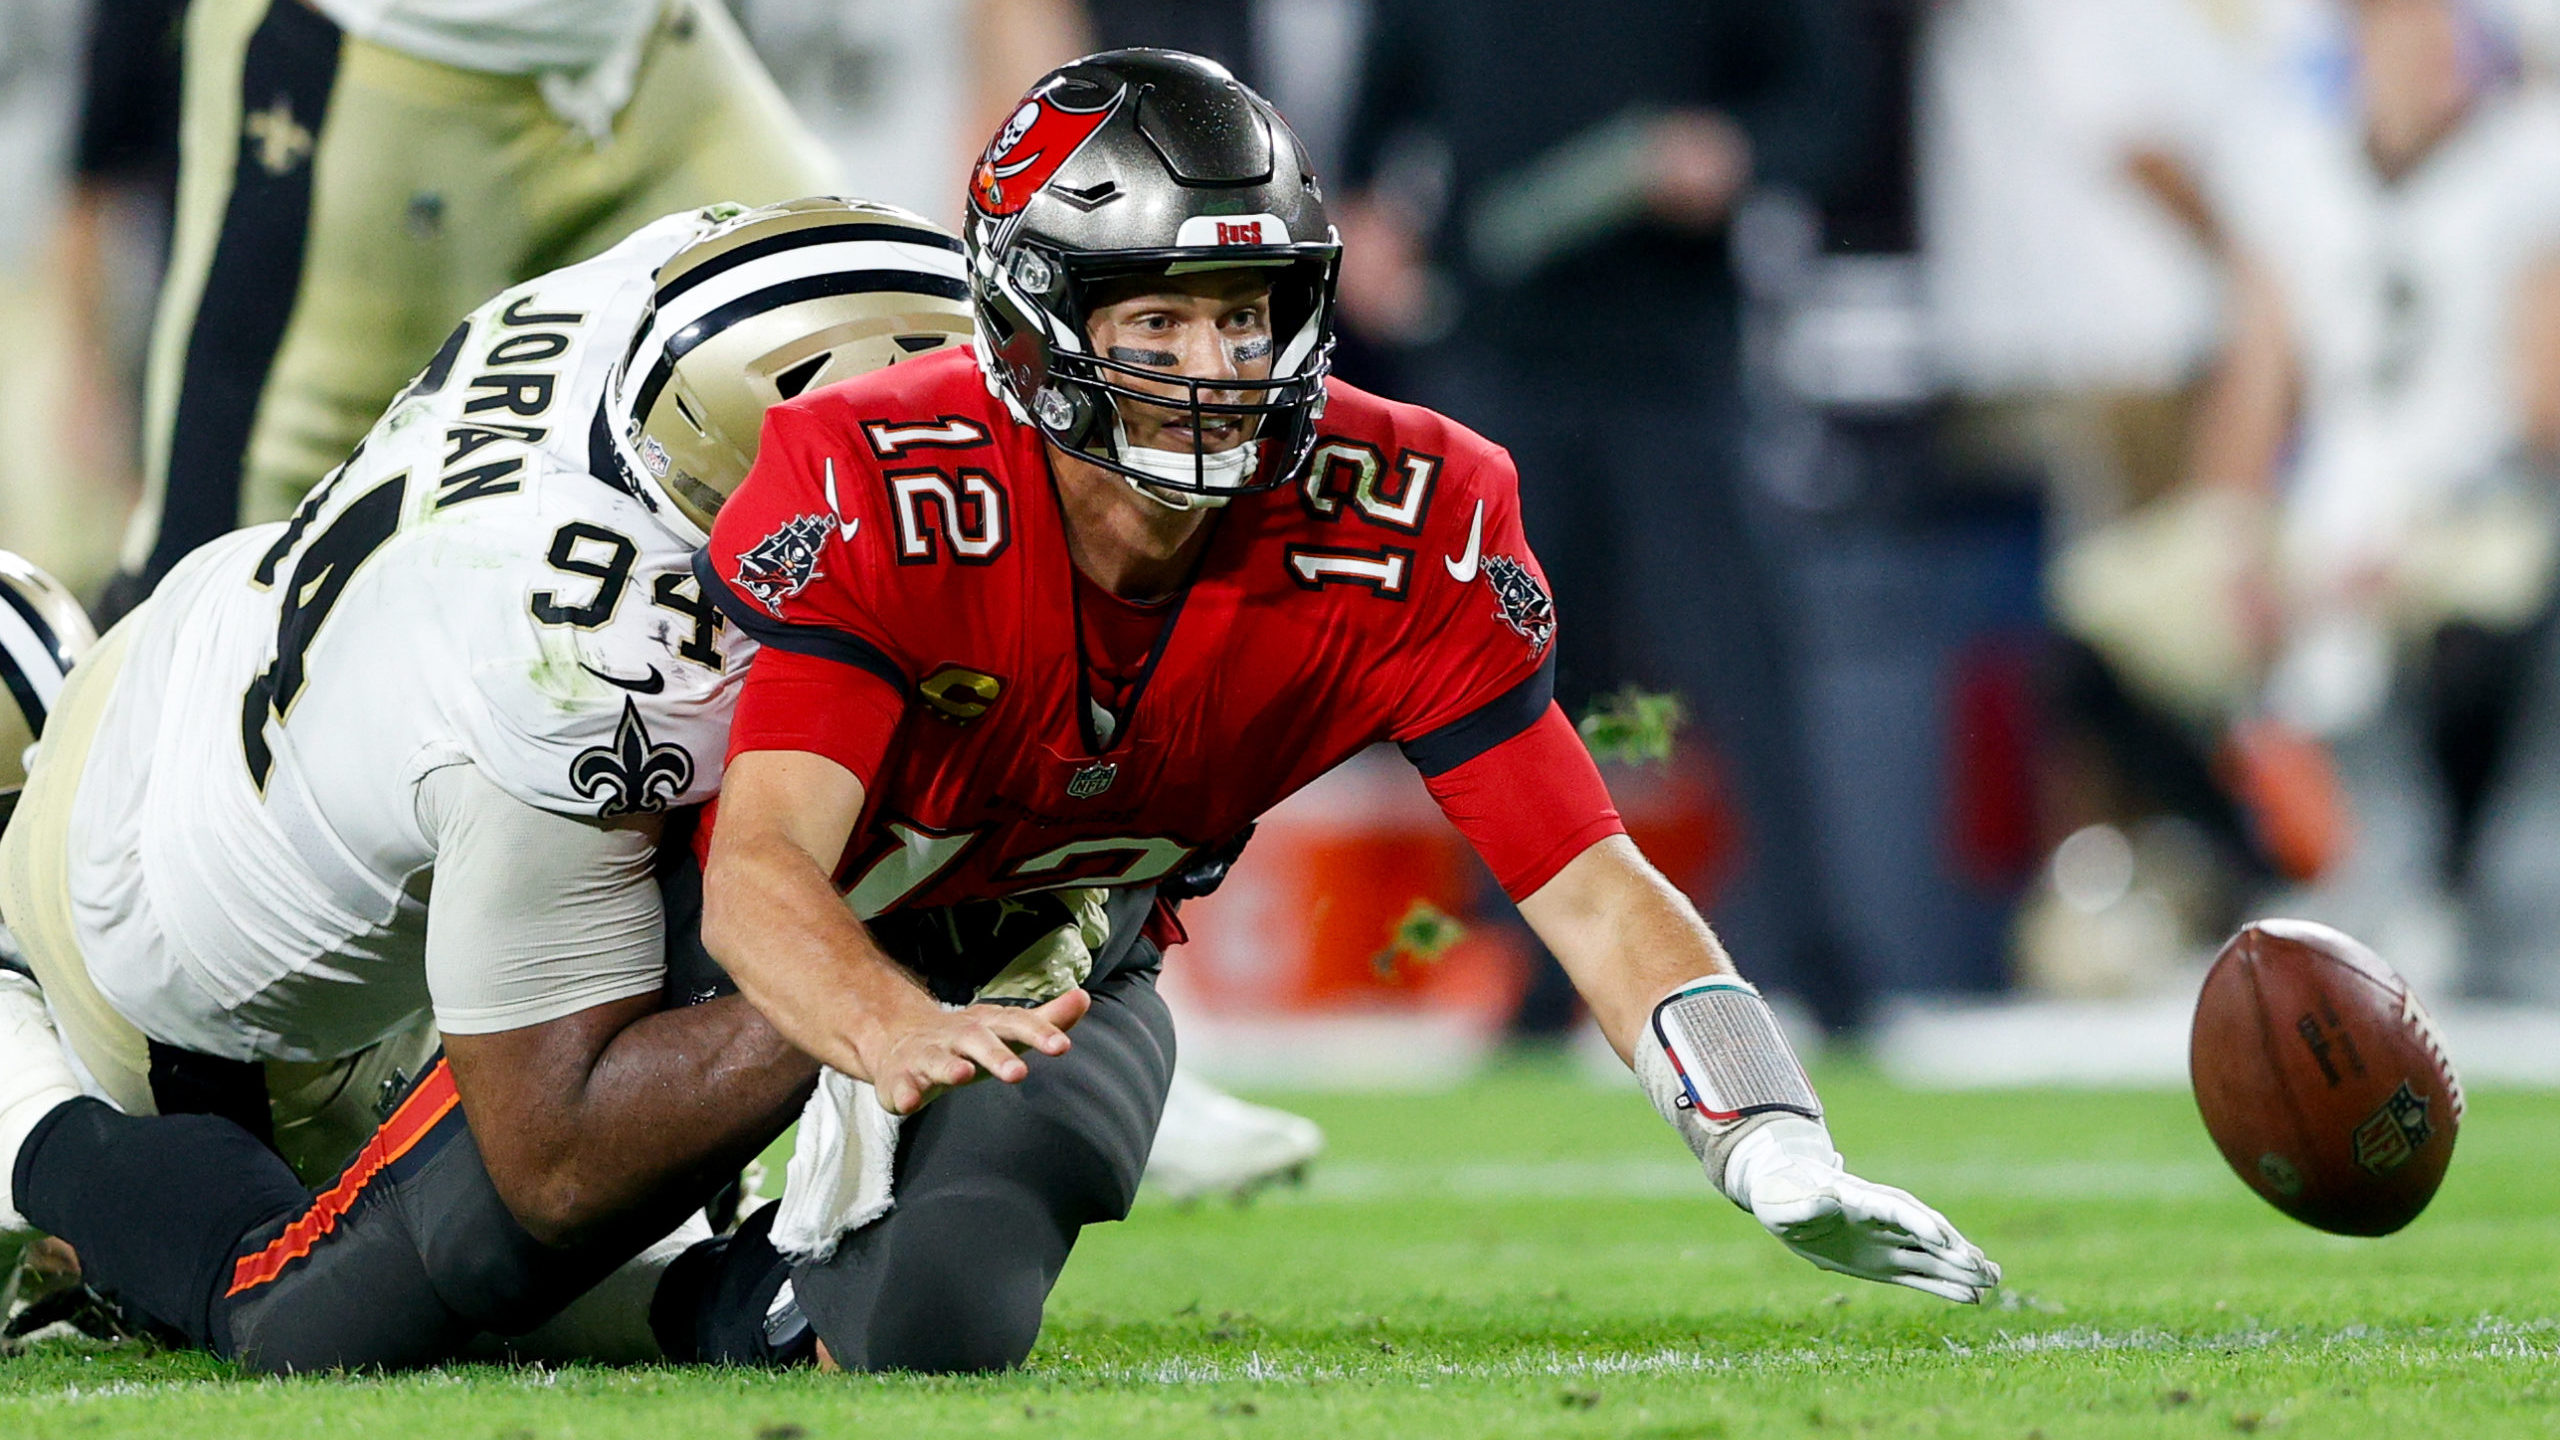 Struggling Buccaneers Favored, but Saints Have Their Number